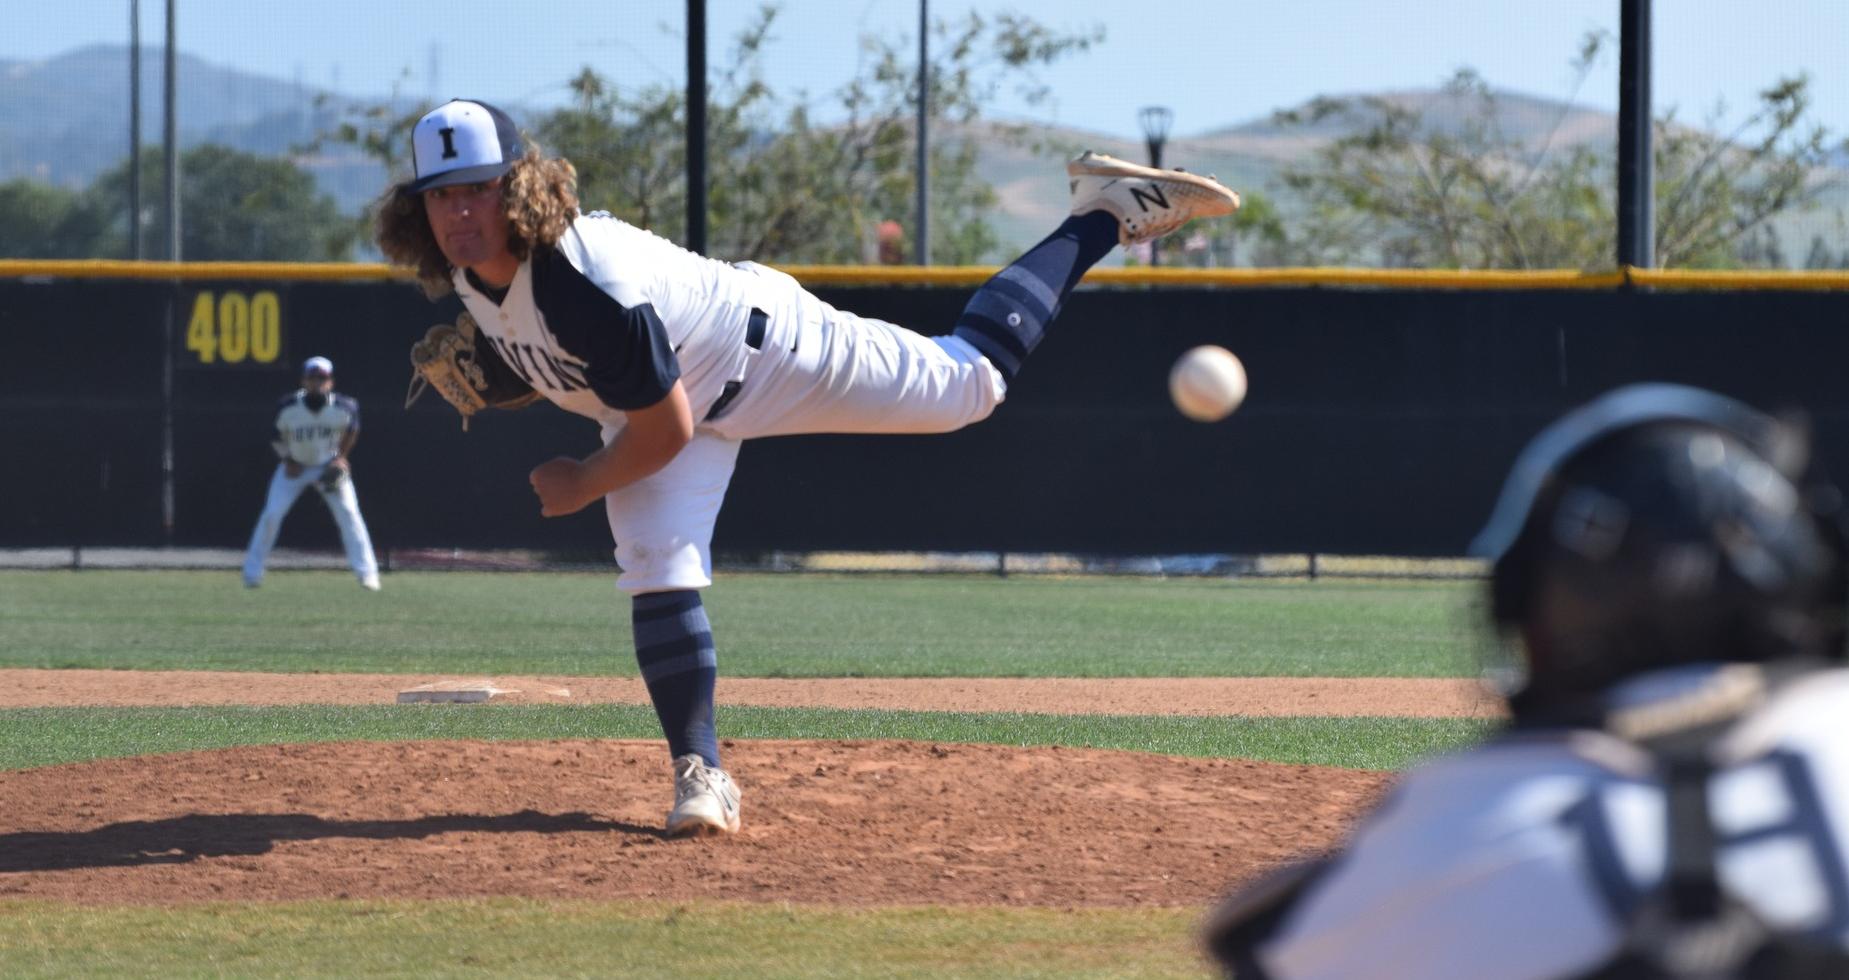 Bougher and Murphy lead baseball team to impressive road win